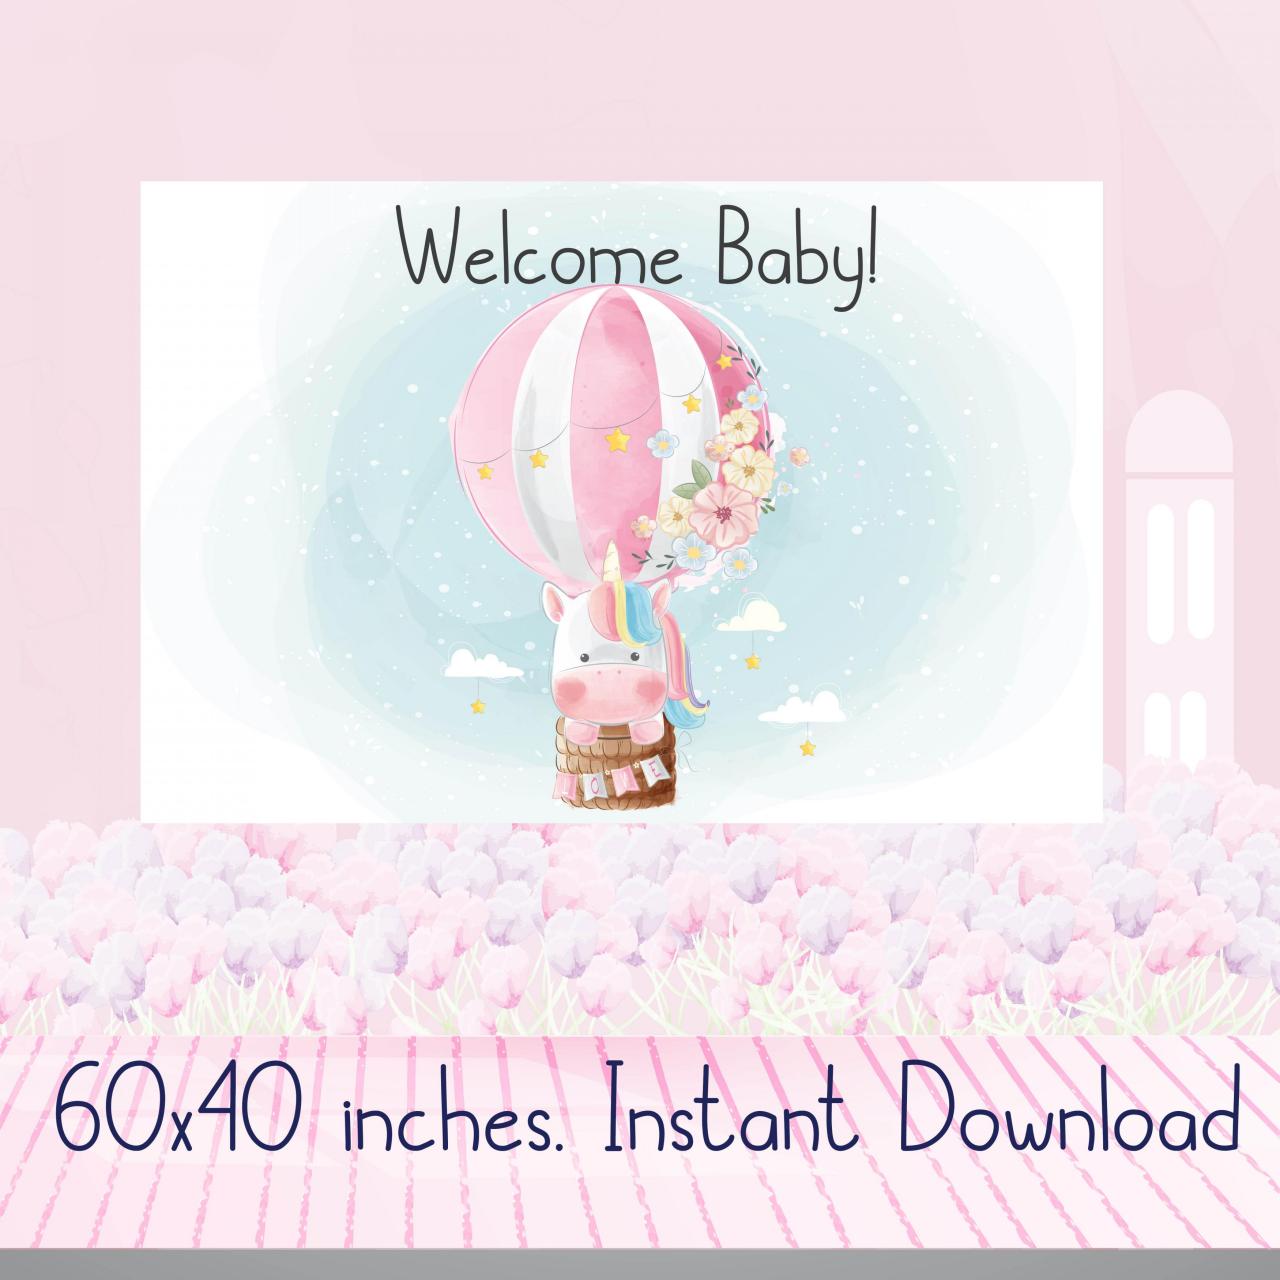 Welcome Baby Cute Unicorn Air Balloon Baby Shower Backdrop